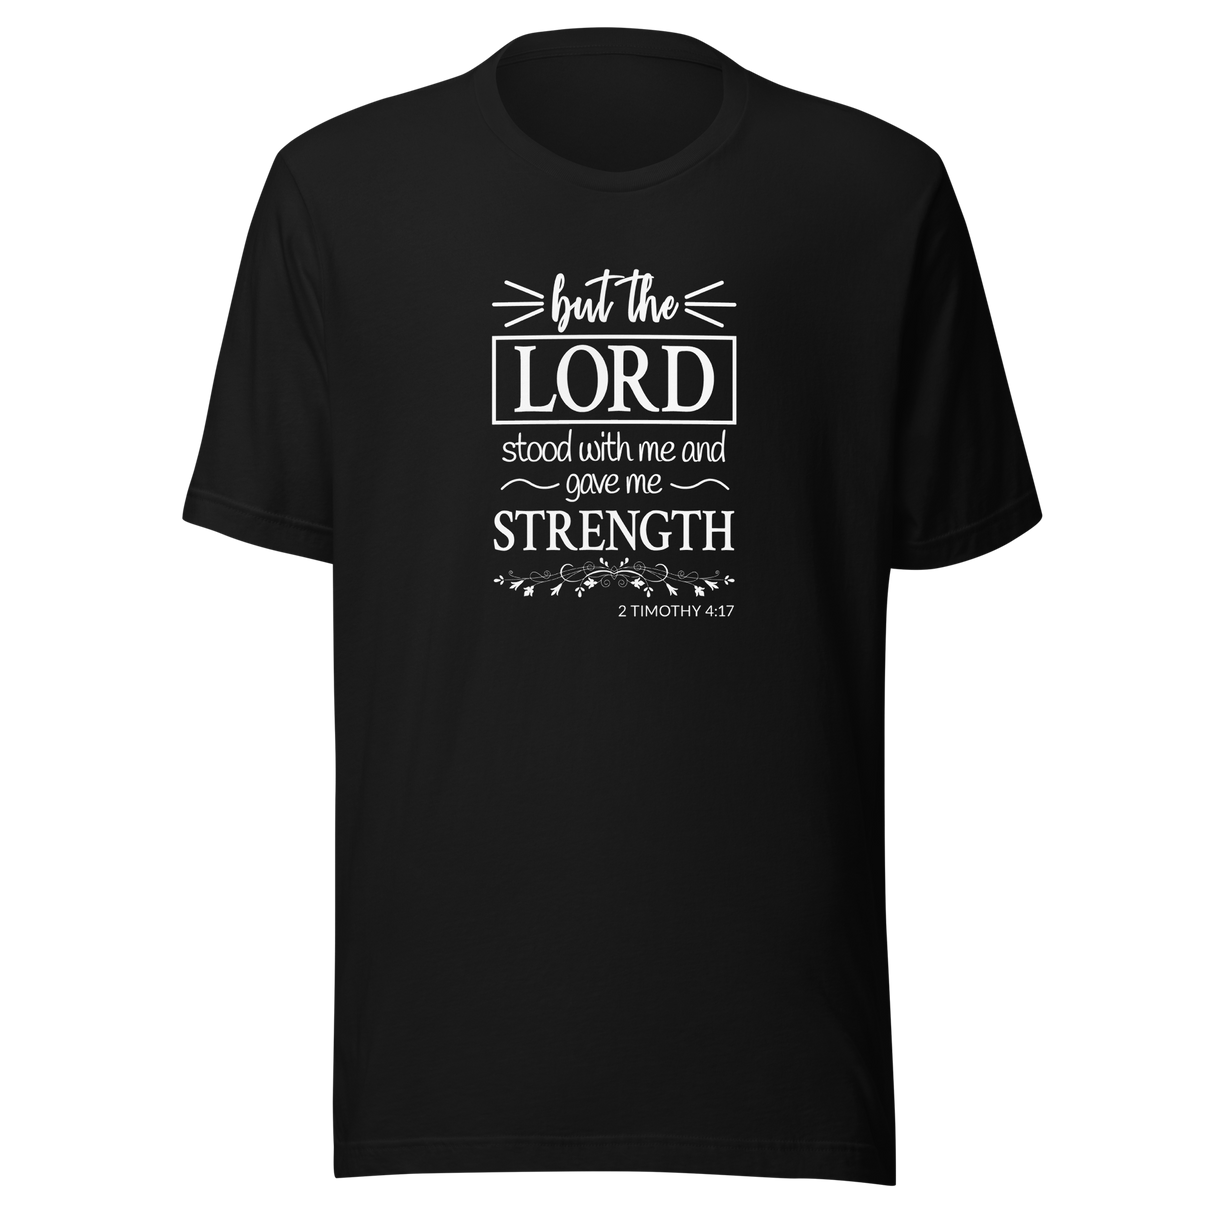 but-the-lord-stood-with-me-and-gave-me-strength-2-timothy-4-17-christian-tee-2-timothy-4-17-t-shirt-bible-tee-jesus-t-shirt-tee#color_black